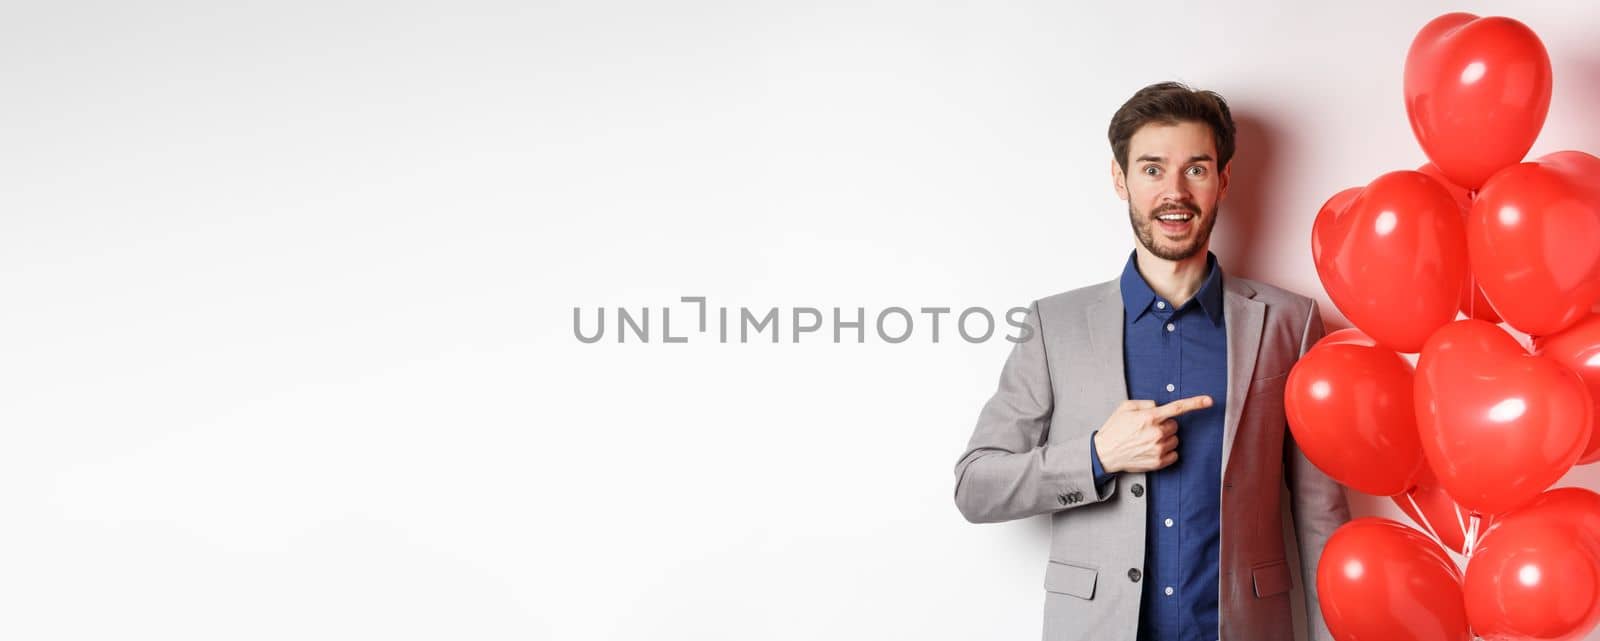 Lovers day. Excited male model in suit pointing finger at Valentines heart balloons and smiling, prepare romantic gifts on date, standing over white background.